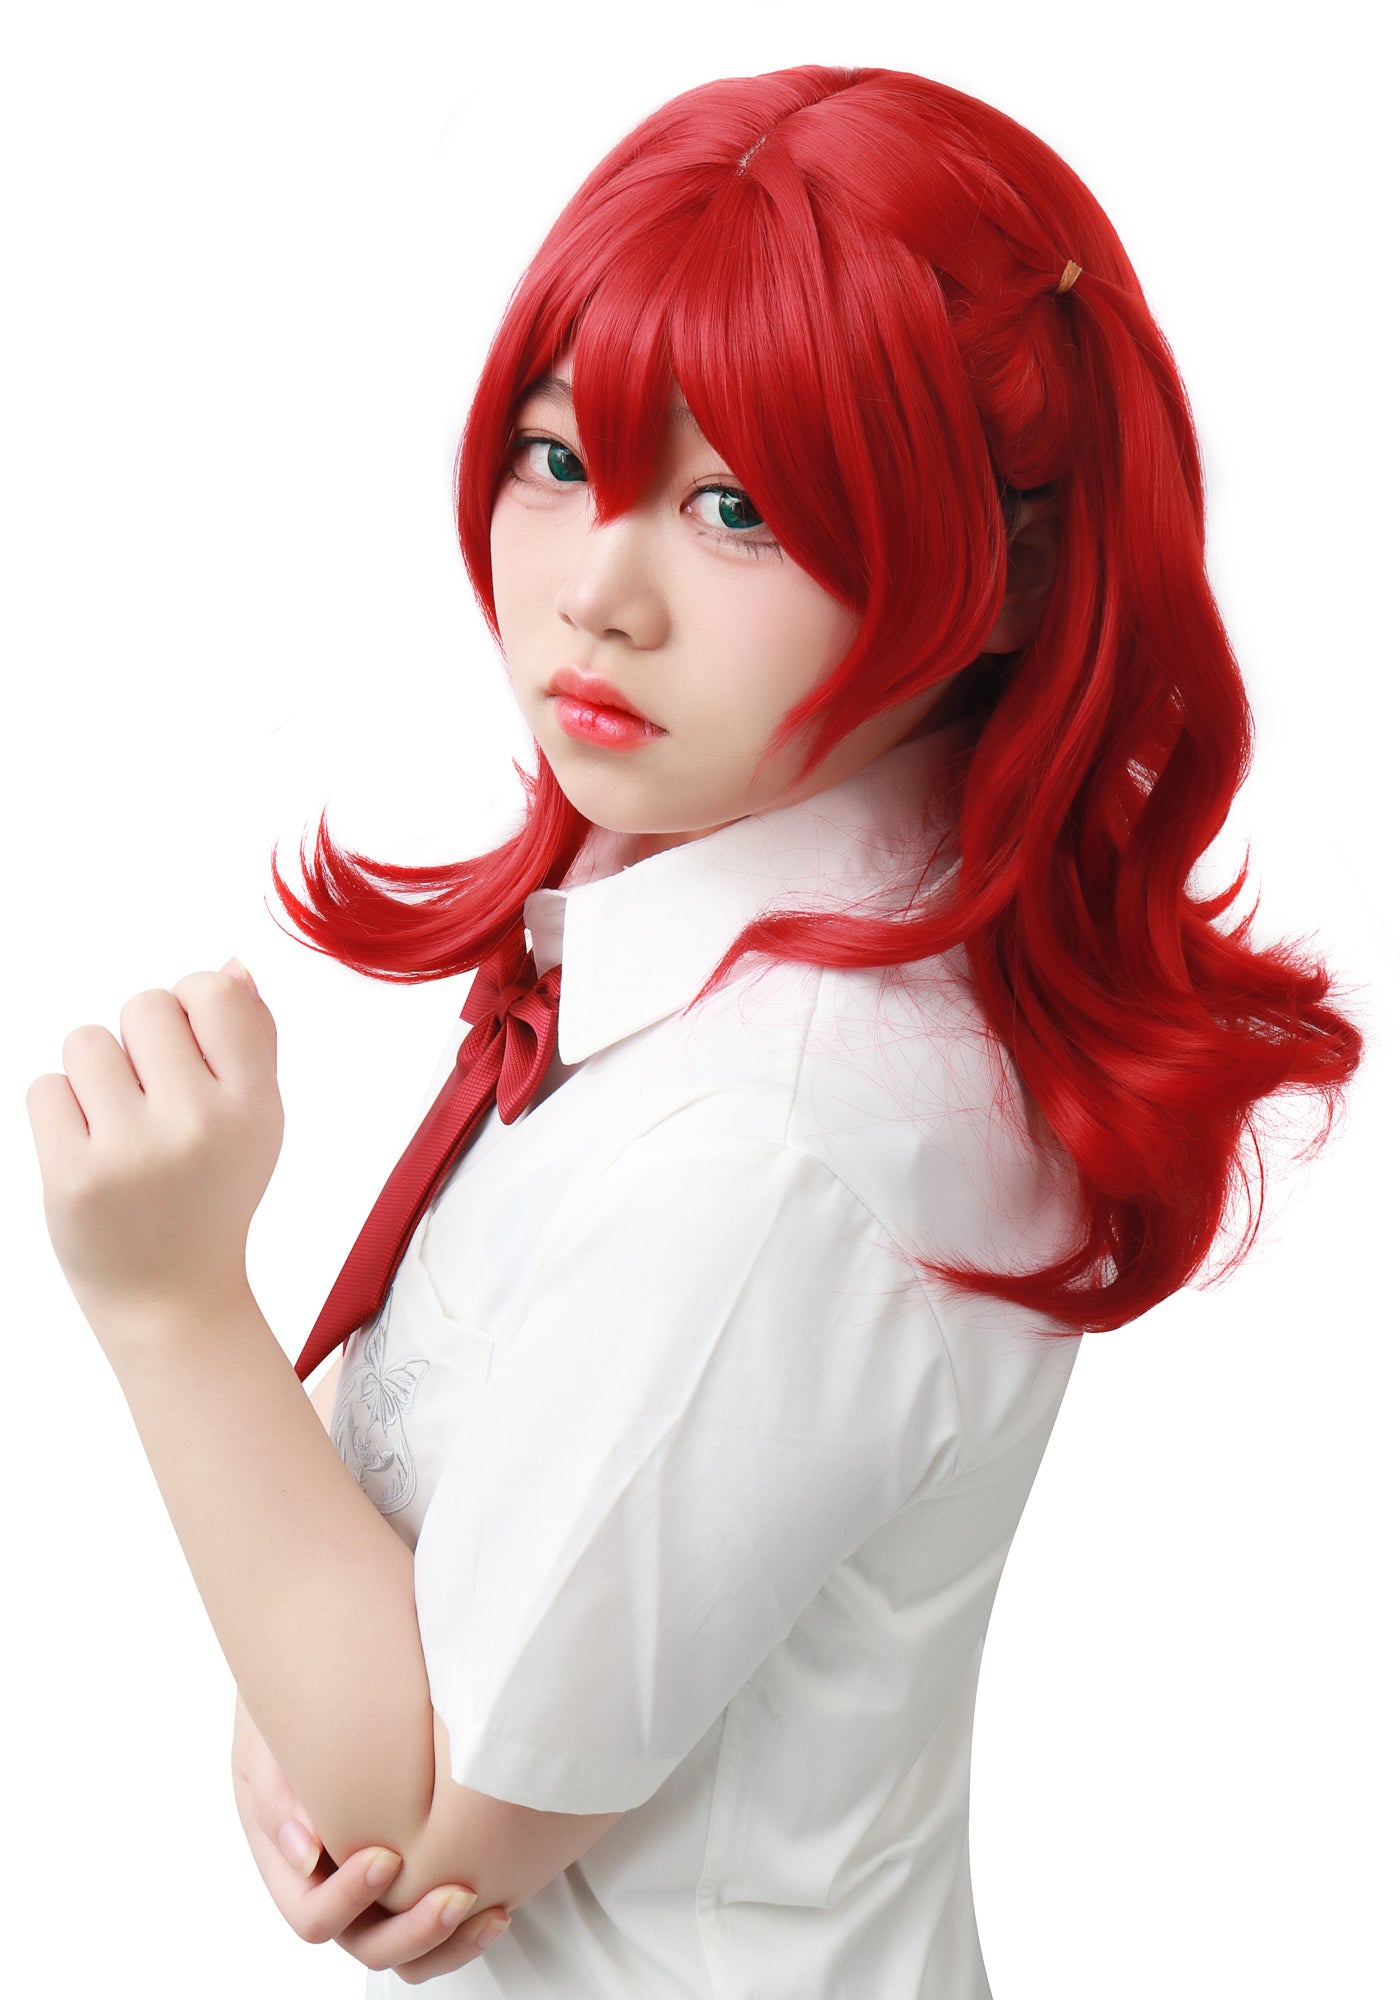 DAZCOS Kita Ikuyo with Side Ponytail Red Cosplay Wig Red